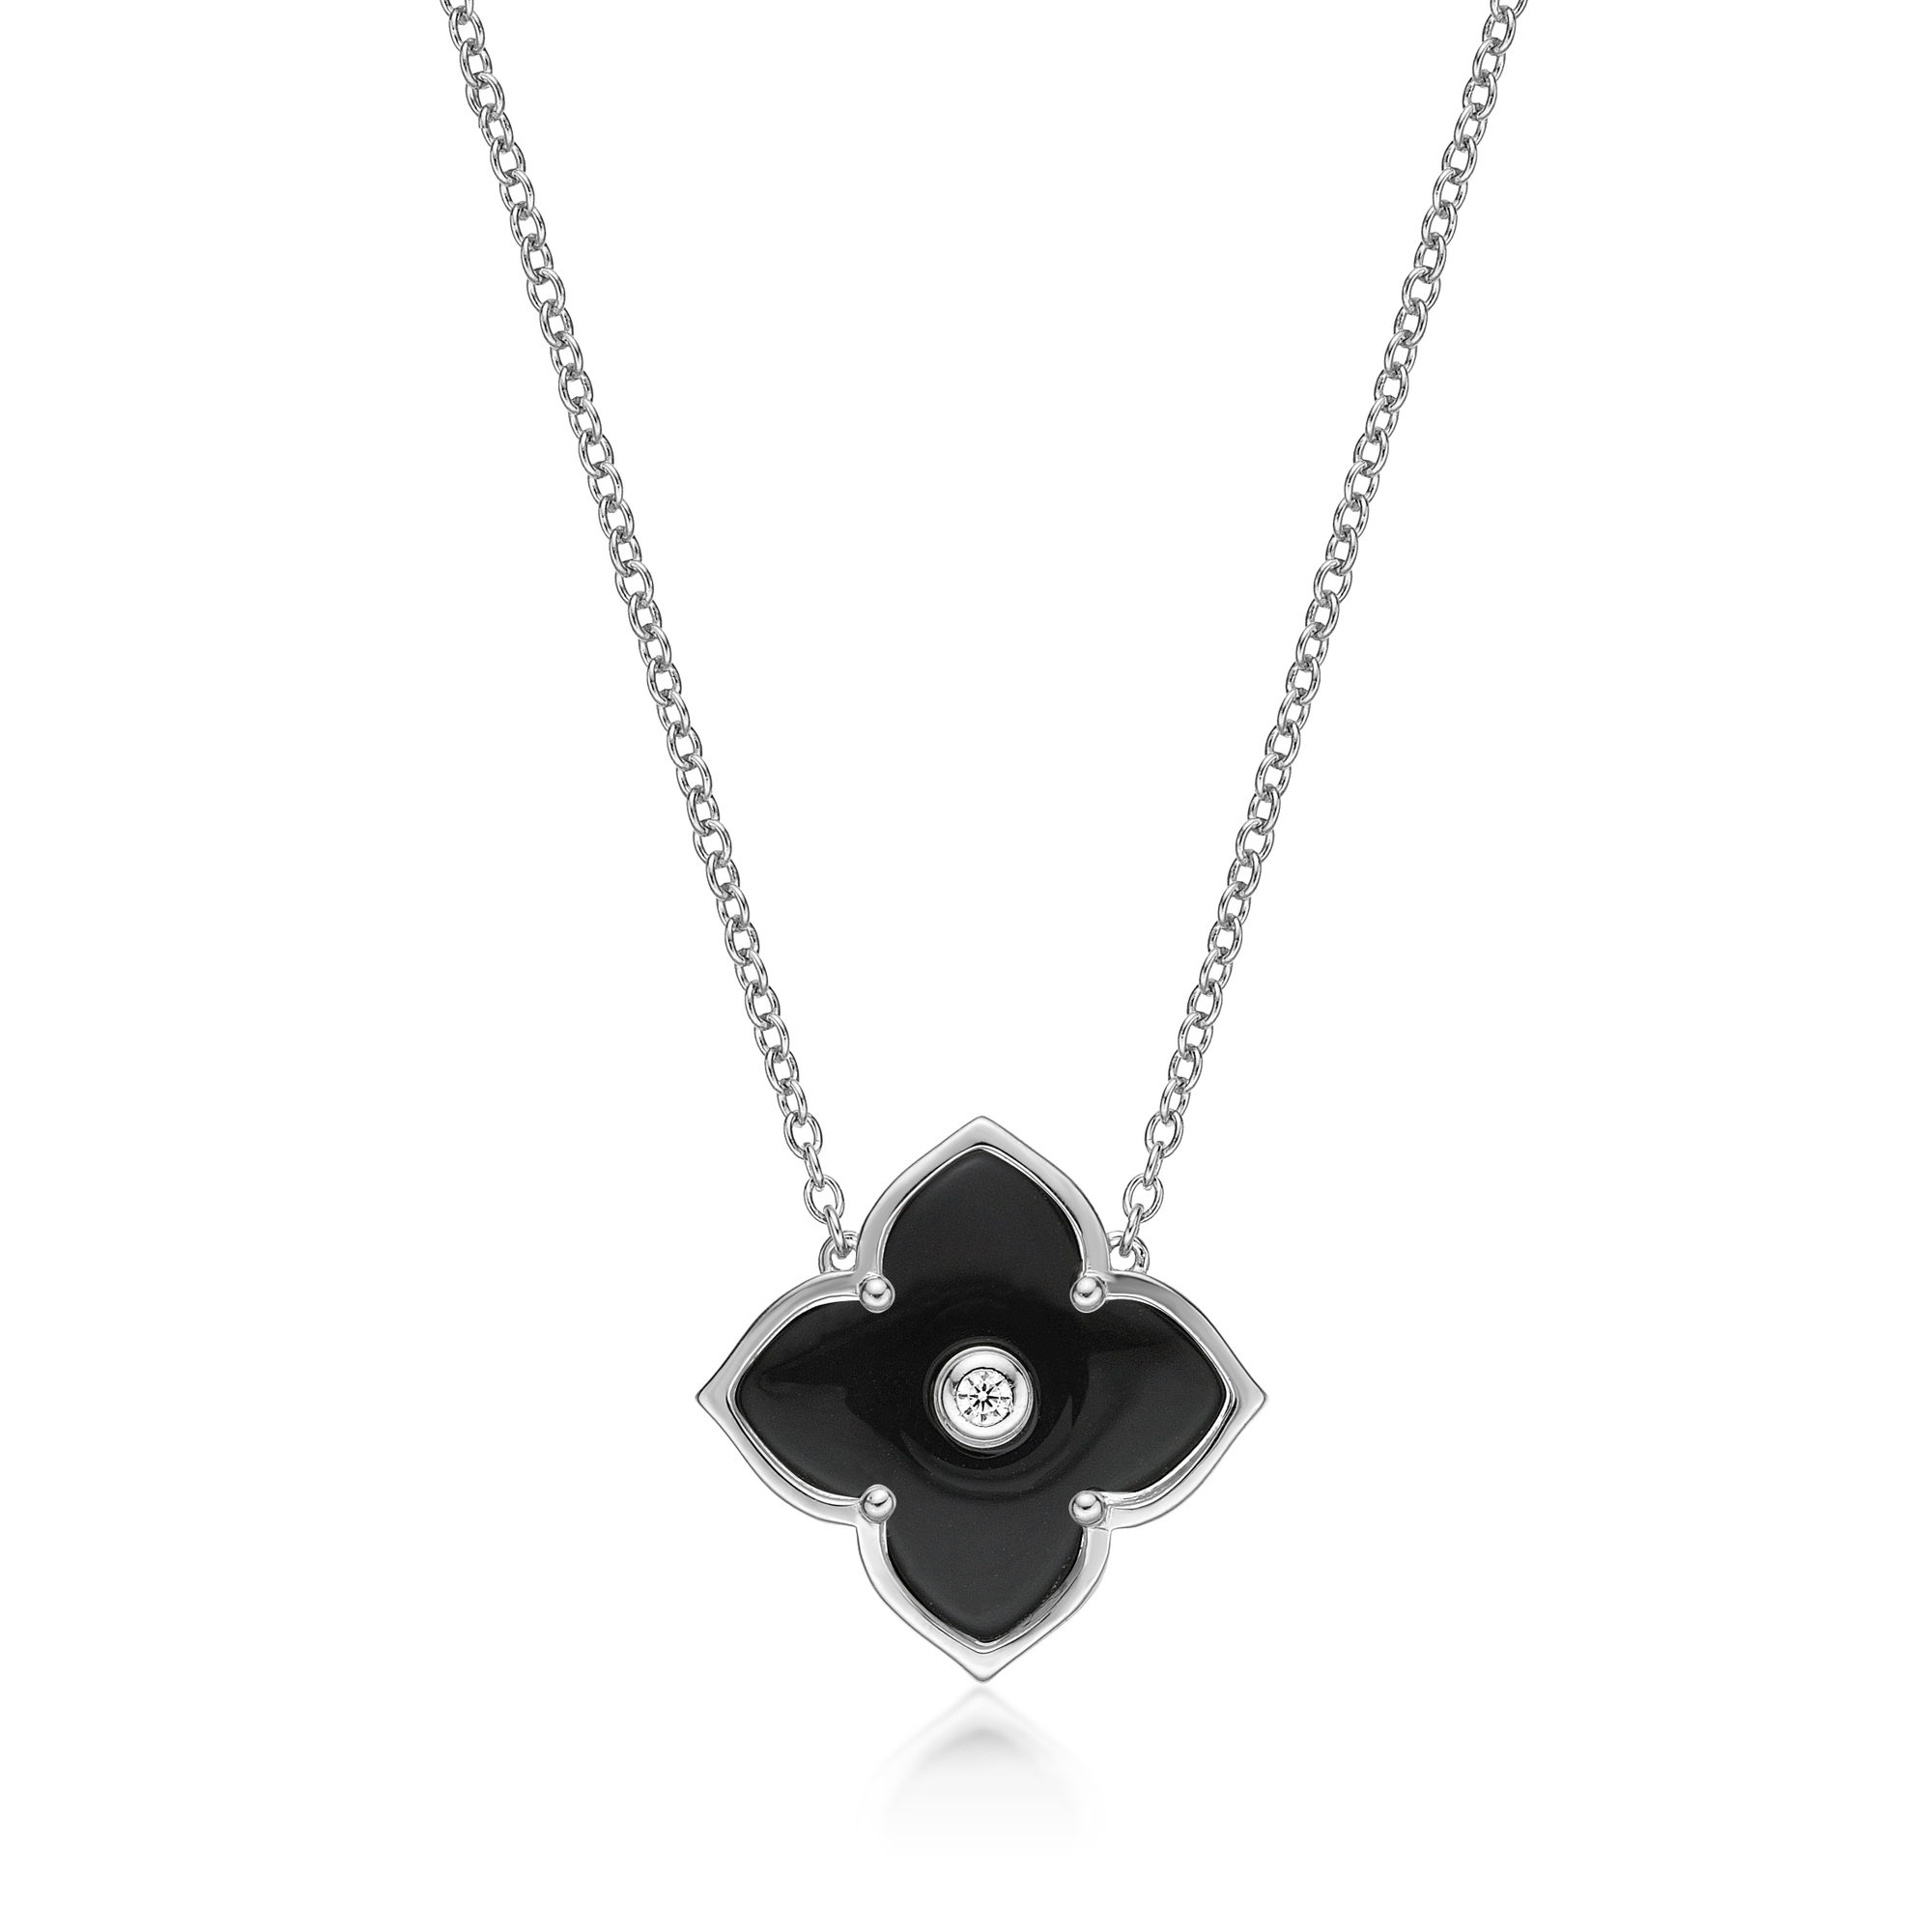 Women's Black Onyx Flower Pendant Necklace in Yellow Gold Plate Sterling Silver with Cubic Zirconia - 16- 18 Inch Adjustable Cable Chain - Flora | Lavari Jewelers